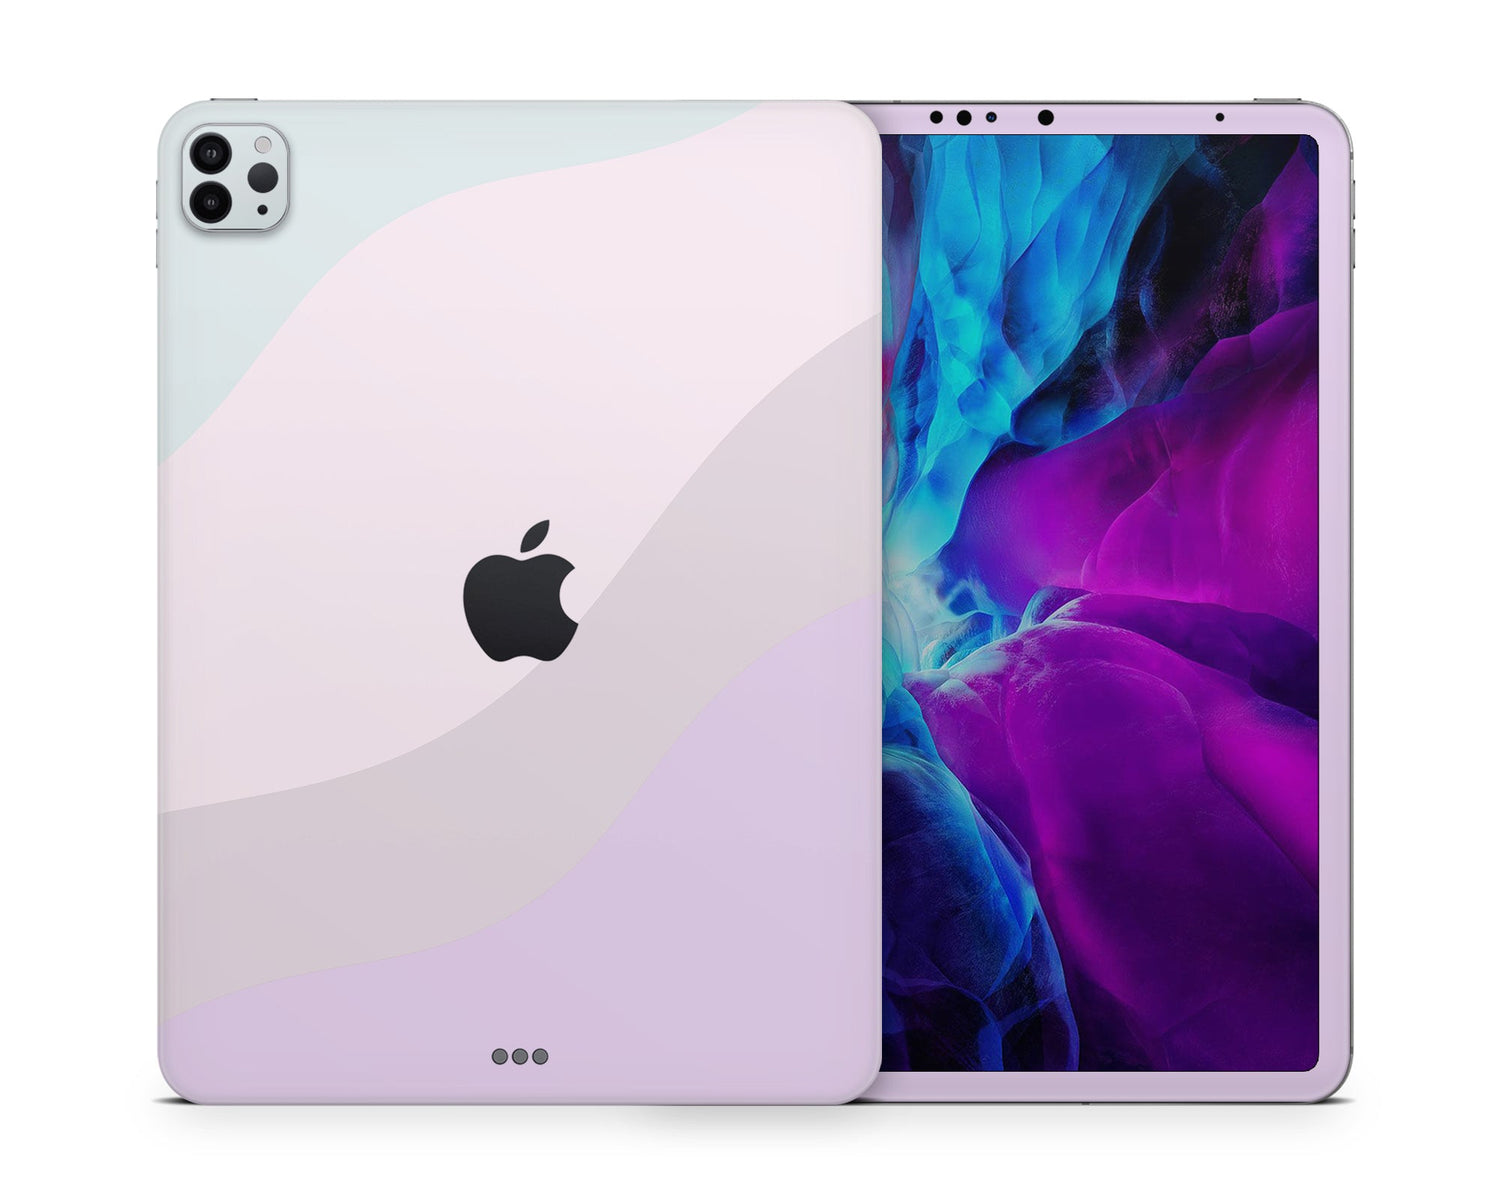 Lux Skins iPad Pastel Cotton Candy iPad Pro 12.9" Gen 5 Skins - Solid Colours Colour Blocking Skin